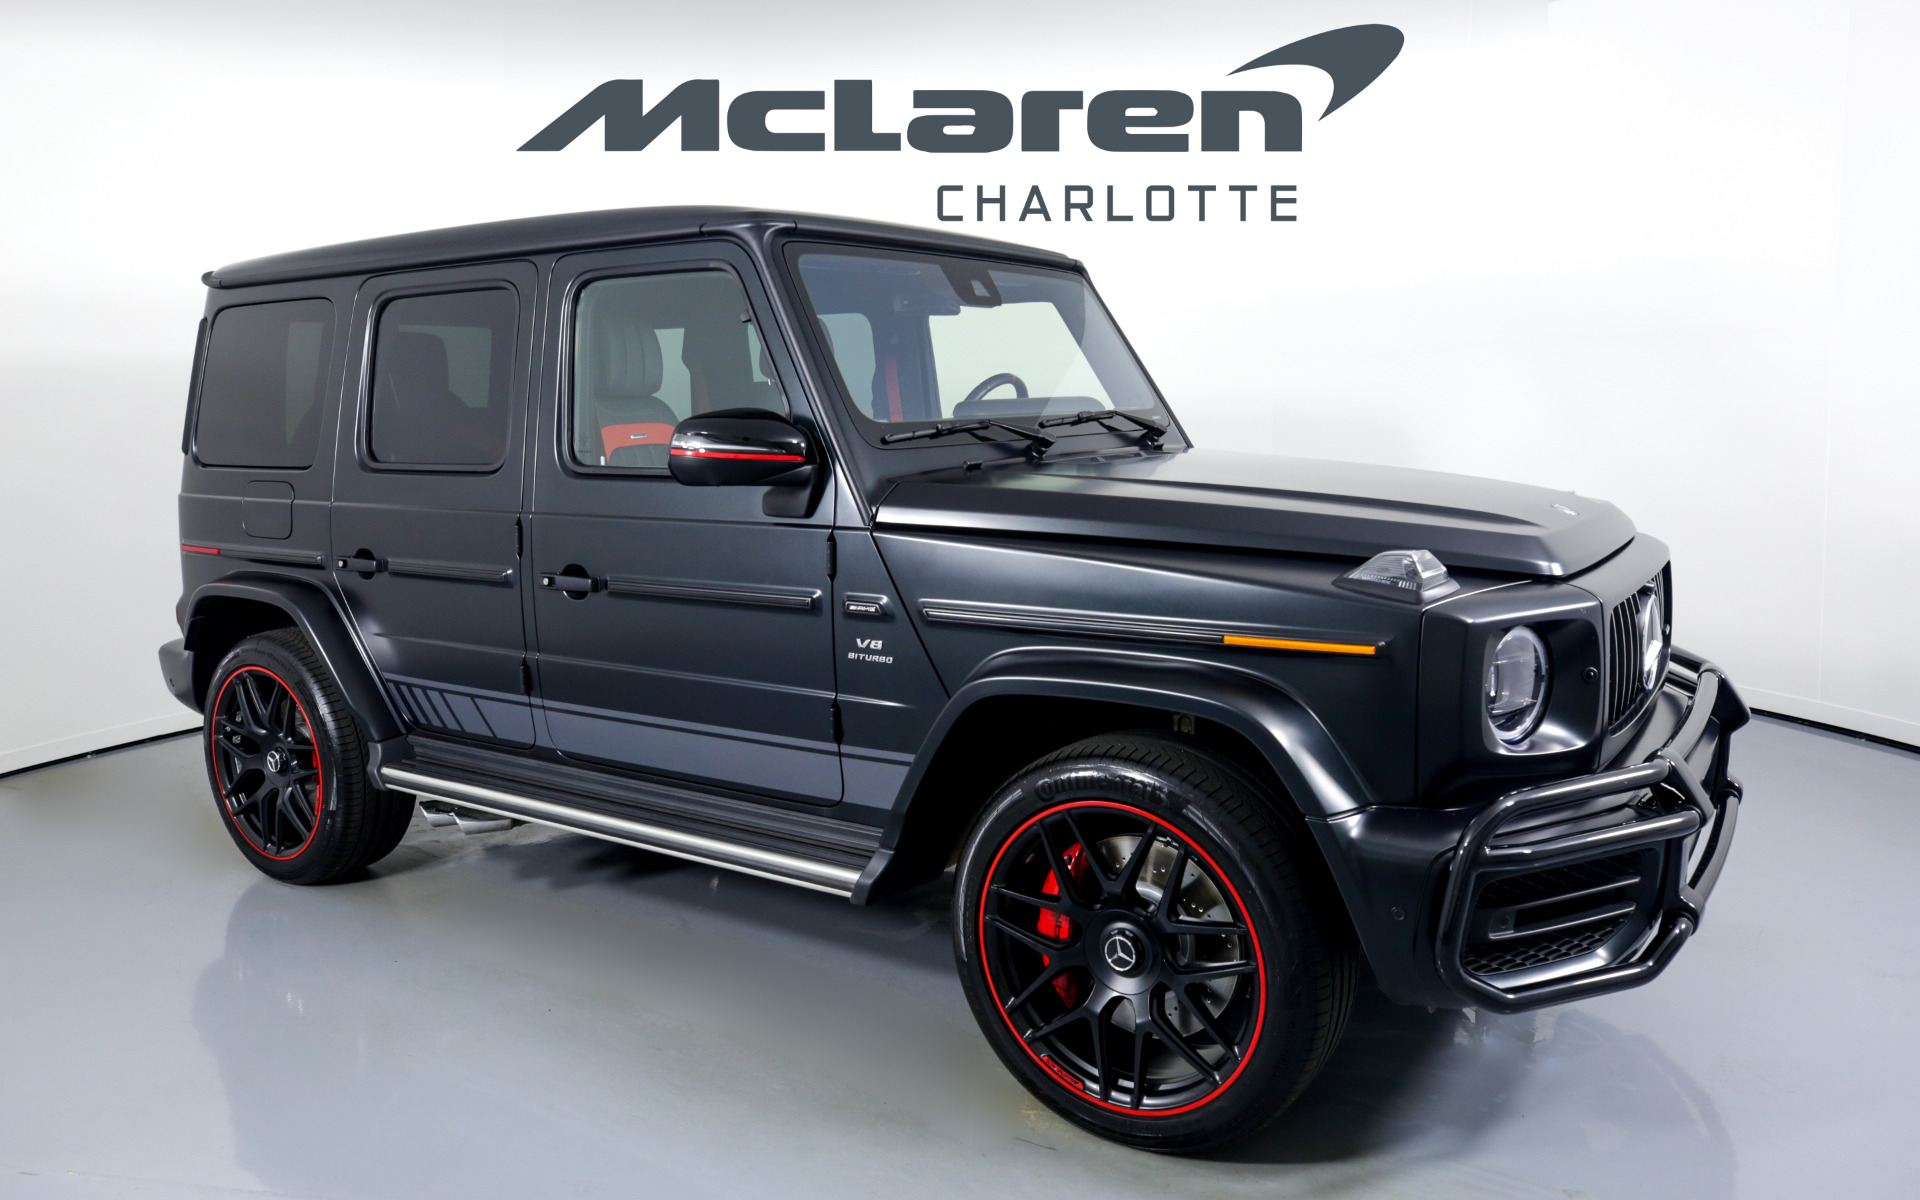 Used 19 Mercedes Benz G Class Amg G 63 For Sale 236 996 Mclaren Charlotte Stock 3086